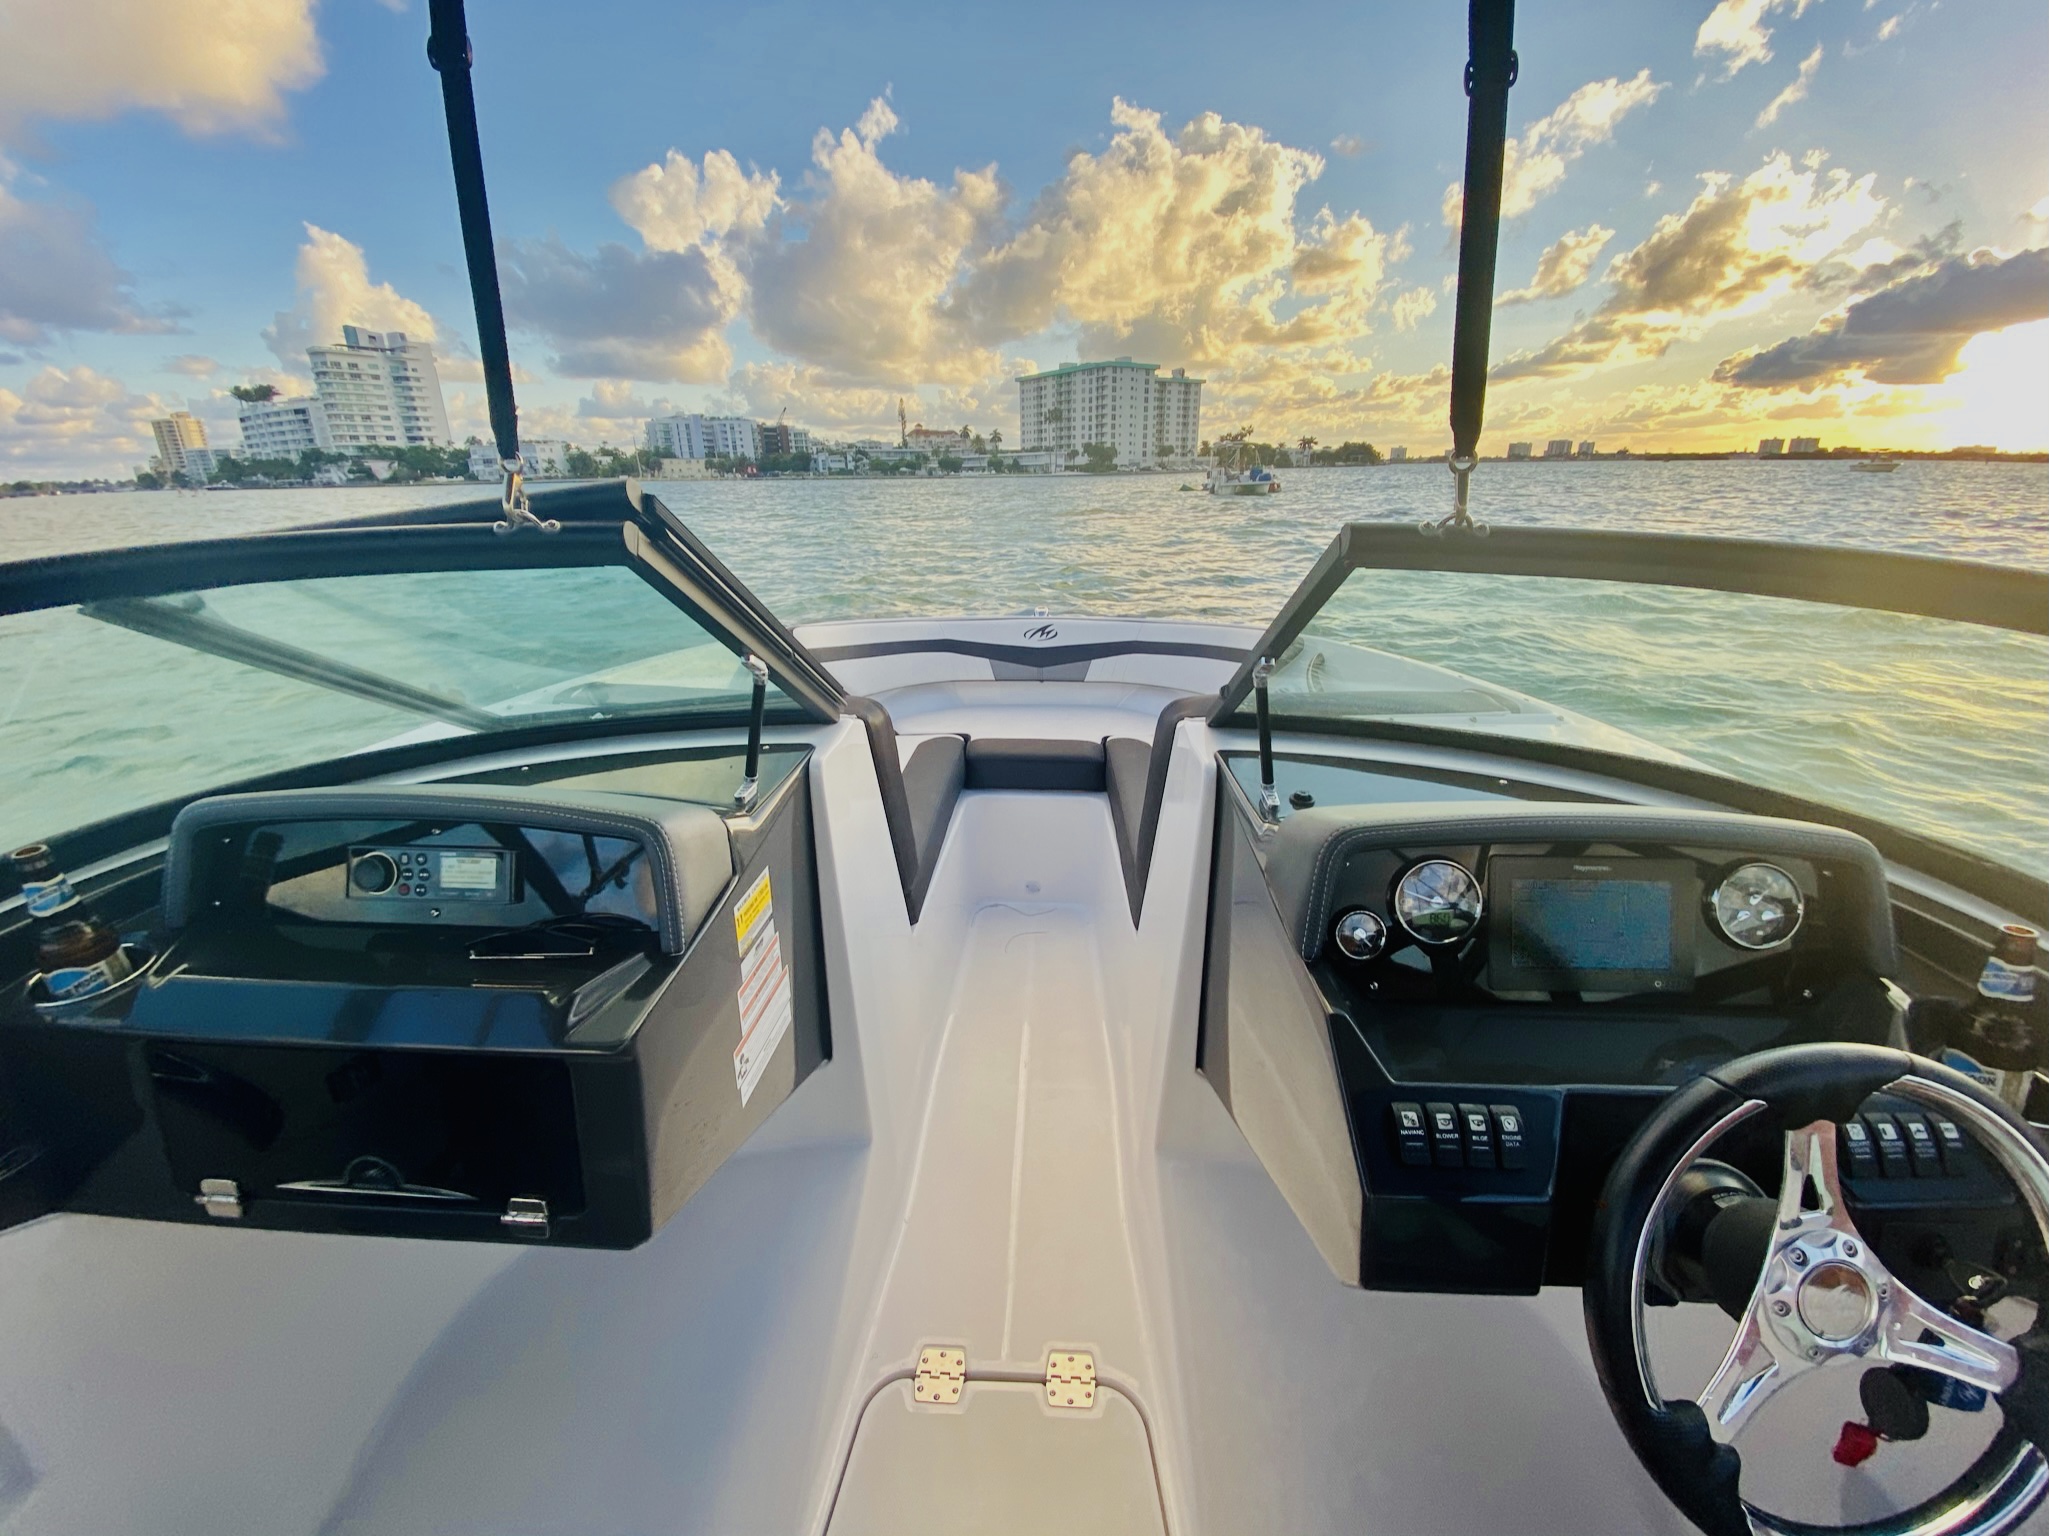 Spend the day on Boat Tours in Biscayne Bay, Miami